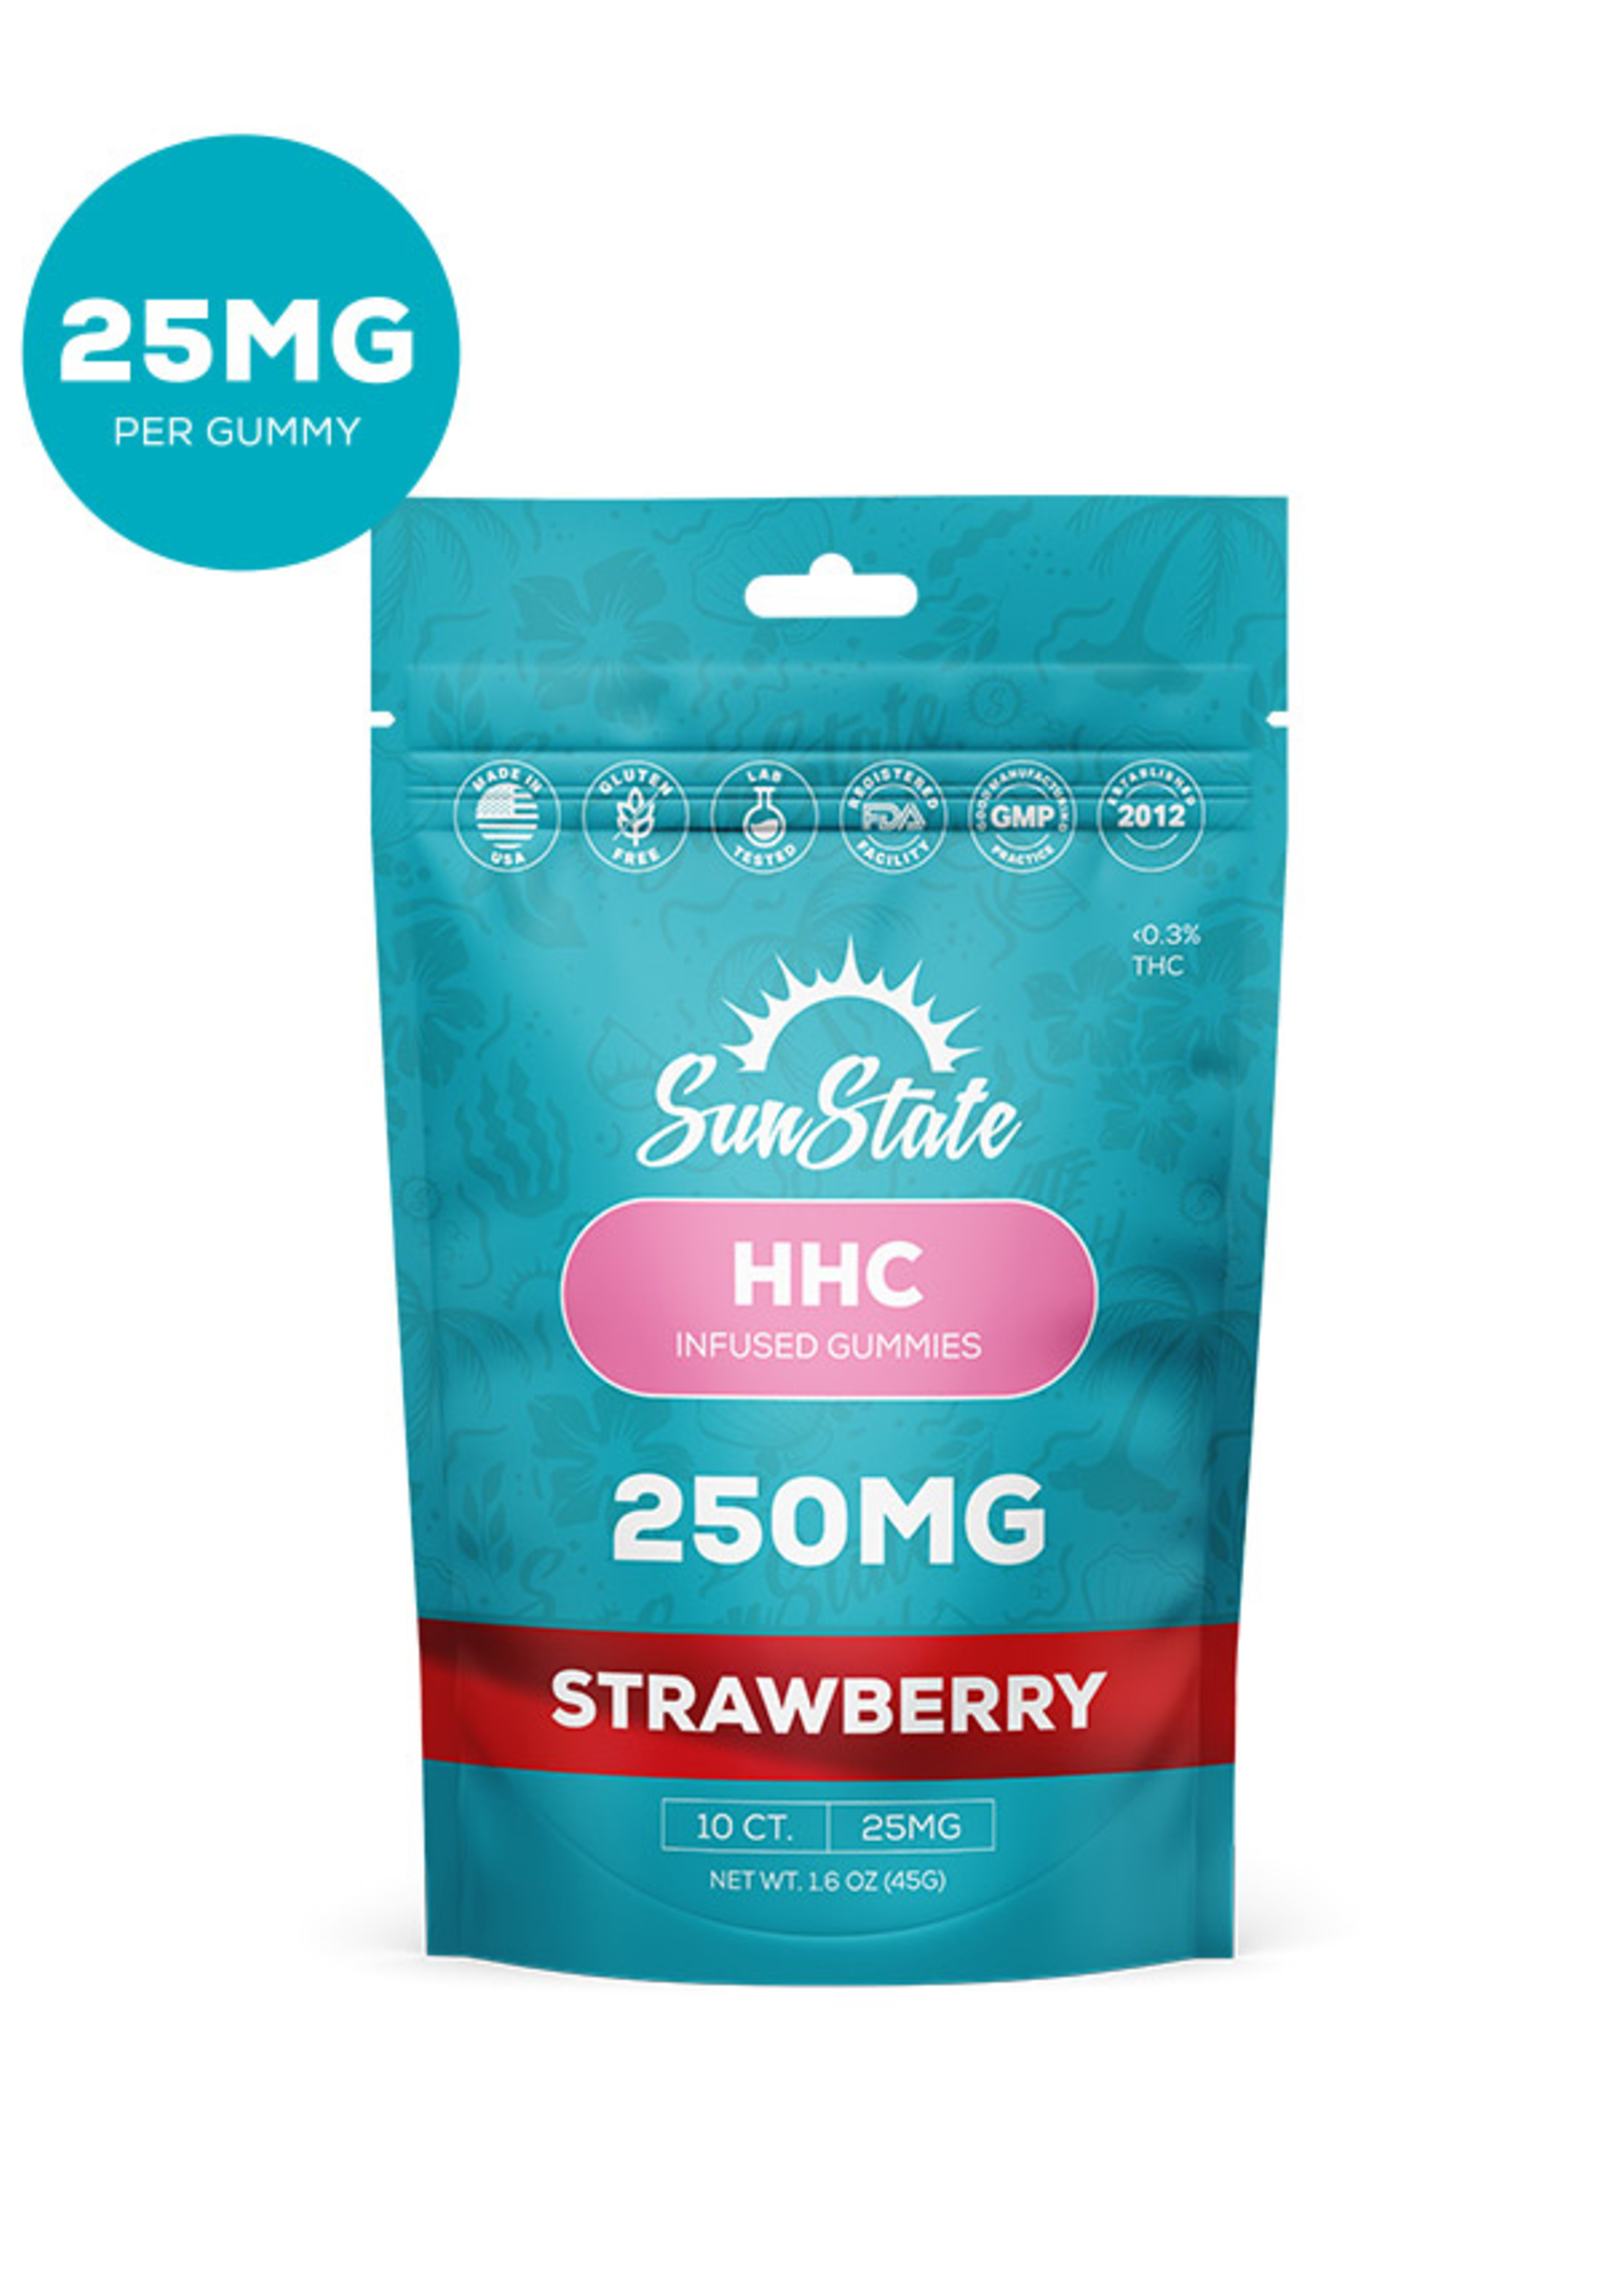 SUNSTATE SUNSTATE HHC INFUSED GUMMIES STRAWBERRY 250MG